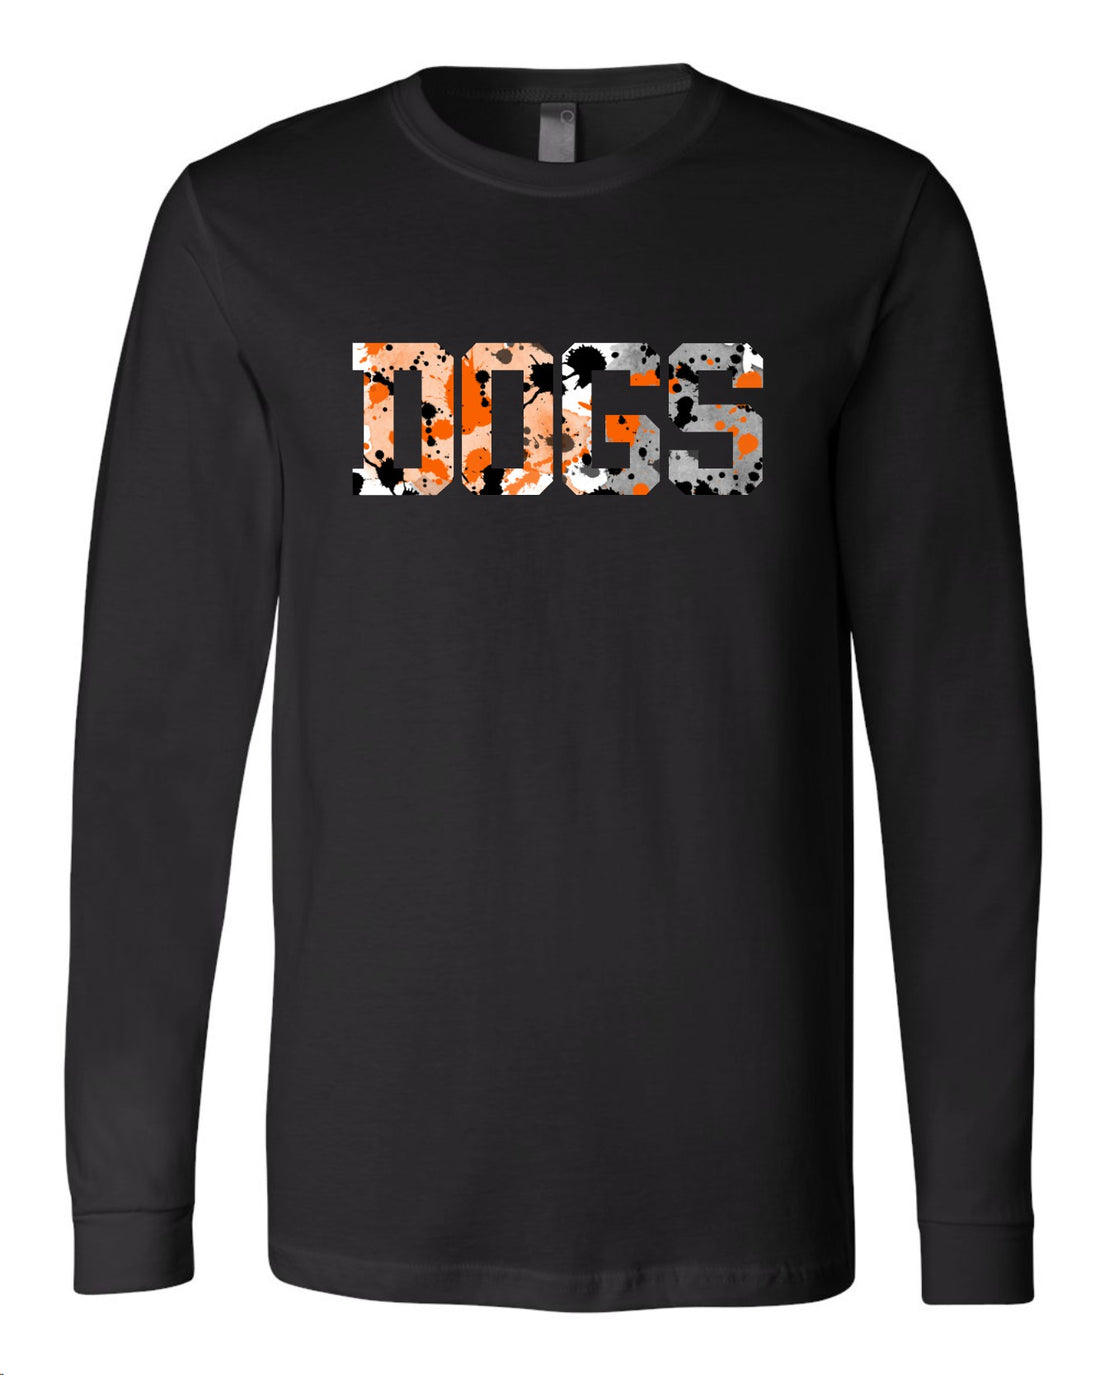 Splatter DOGS Long Sleeve Tee - PRACTICE APPROVED